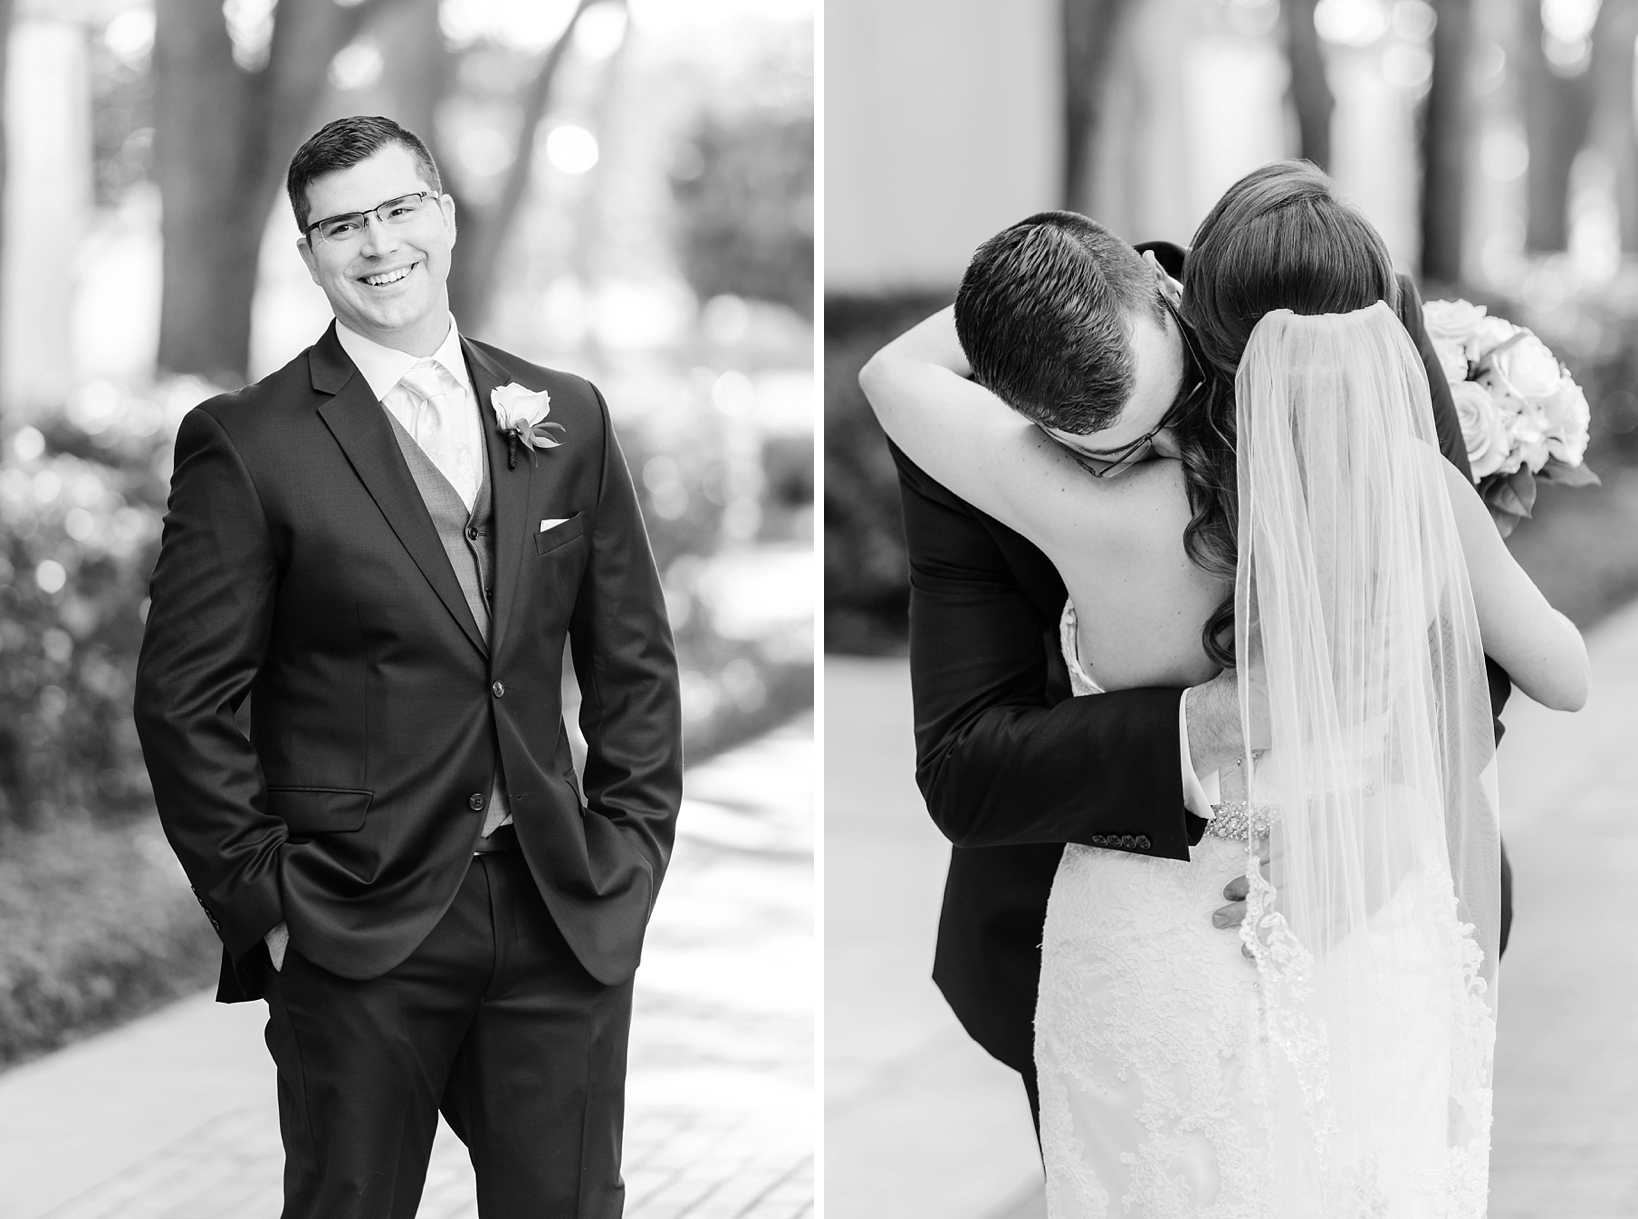 A black and white image of the groom seeing his bride for the first time and them embracing Sarah & Ben Photography